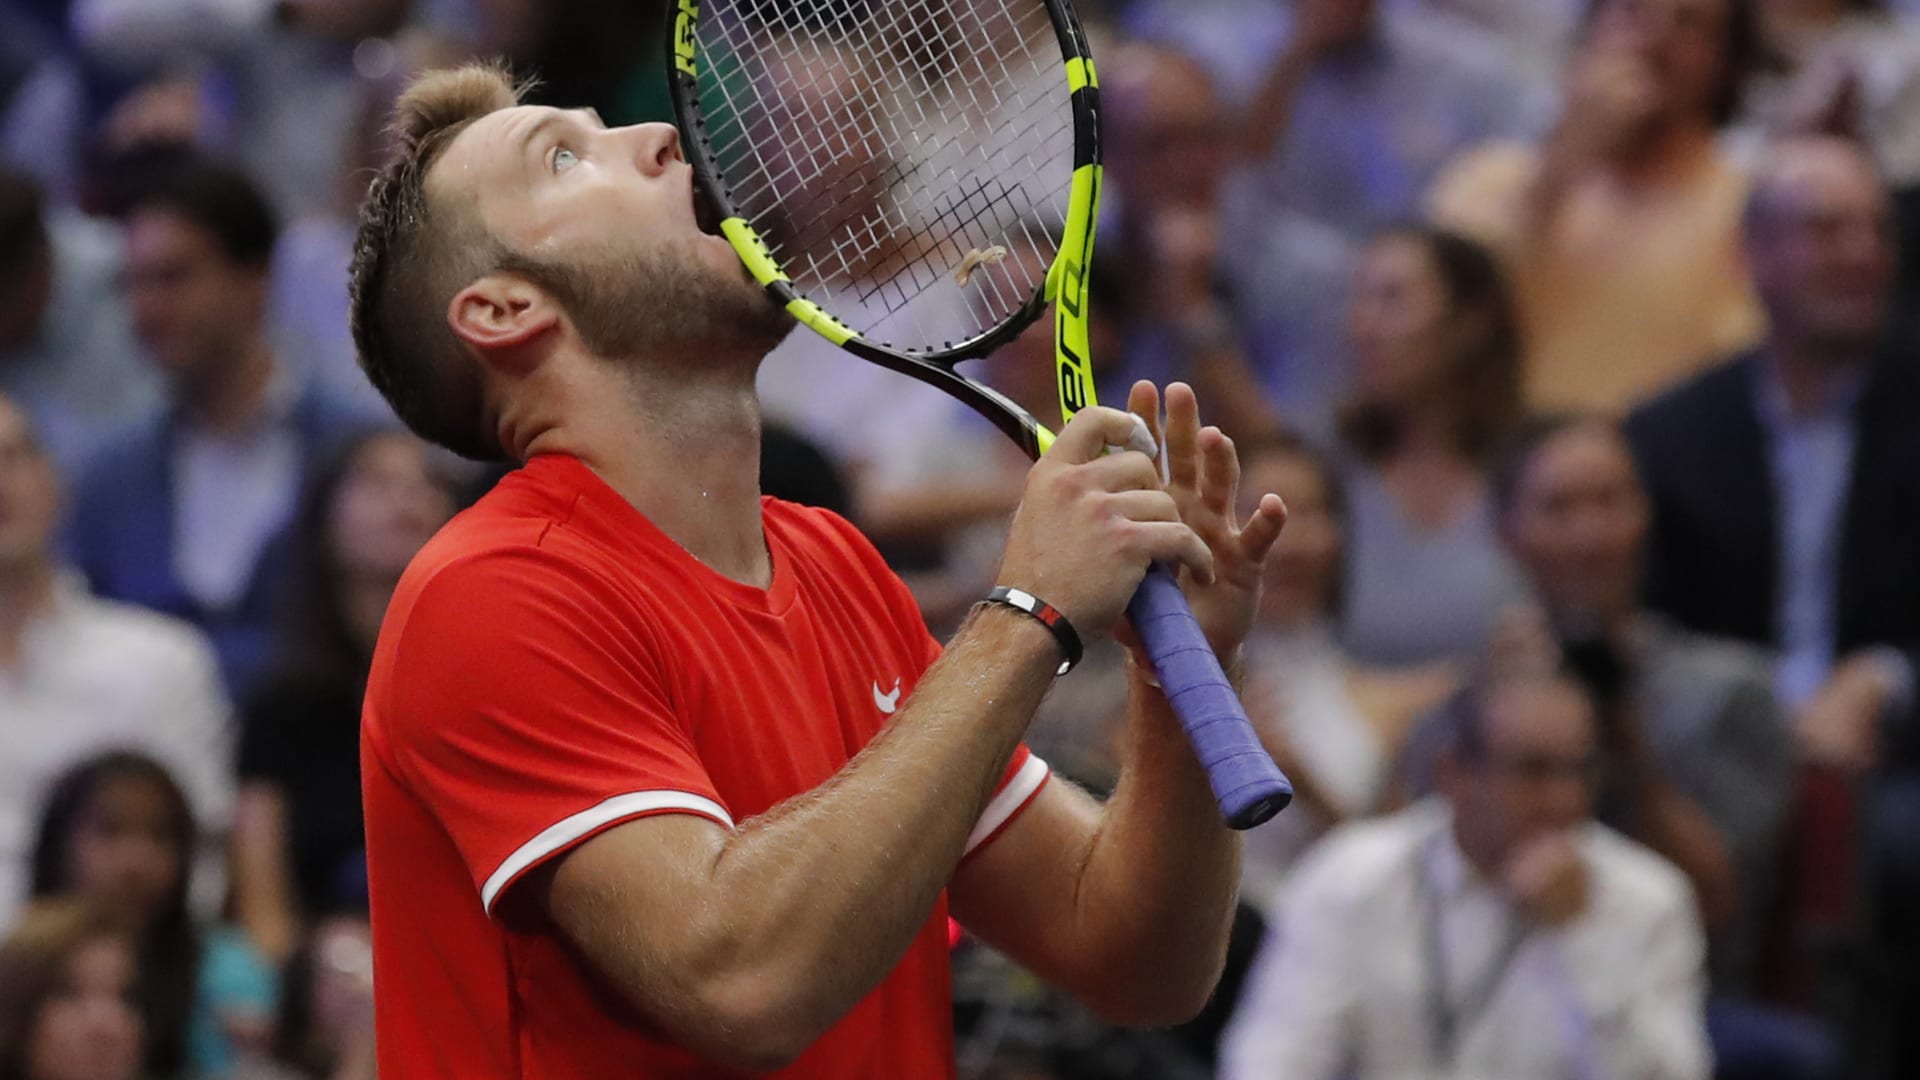 Jack Sock is on the verge of a significant rankings plunge